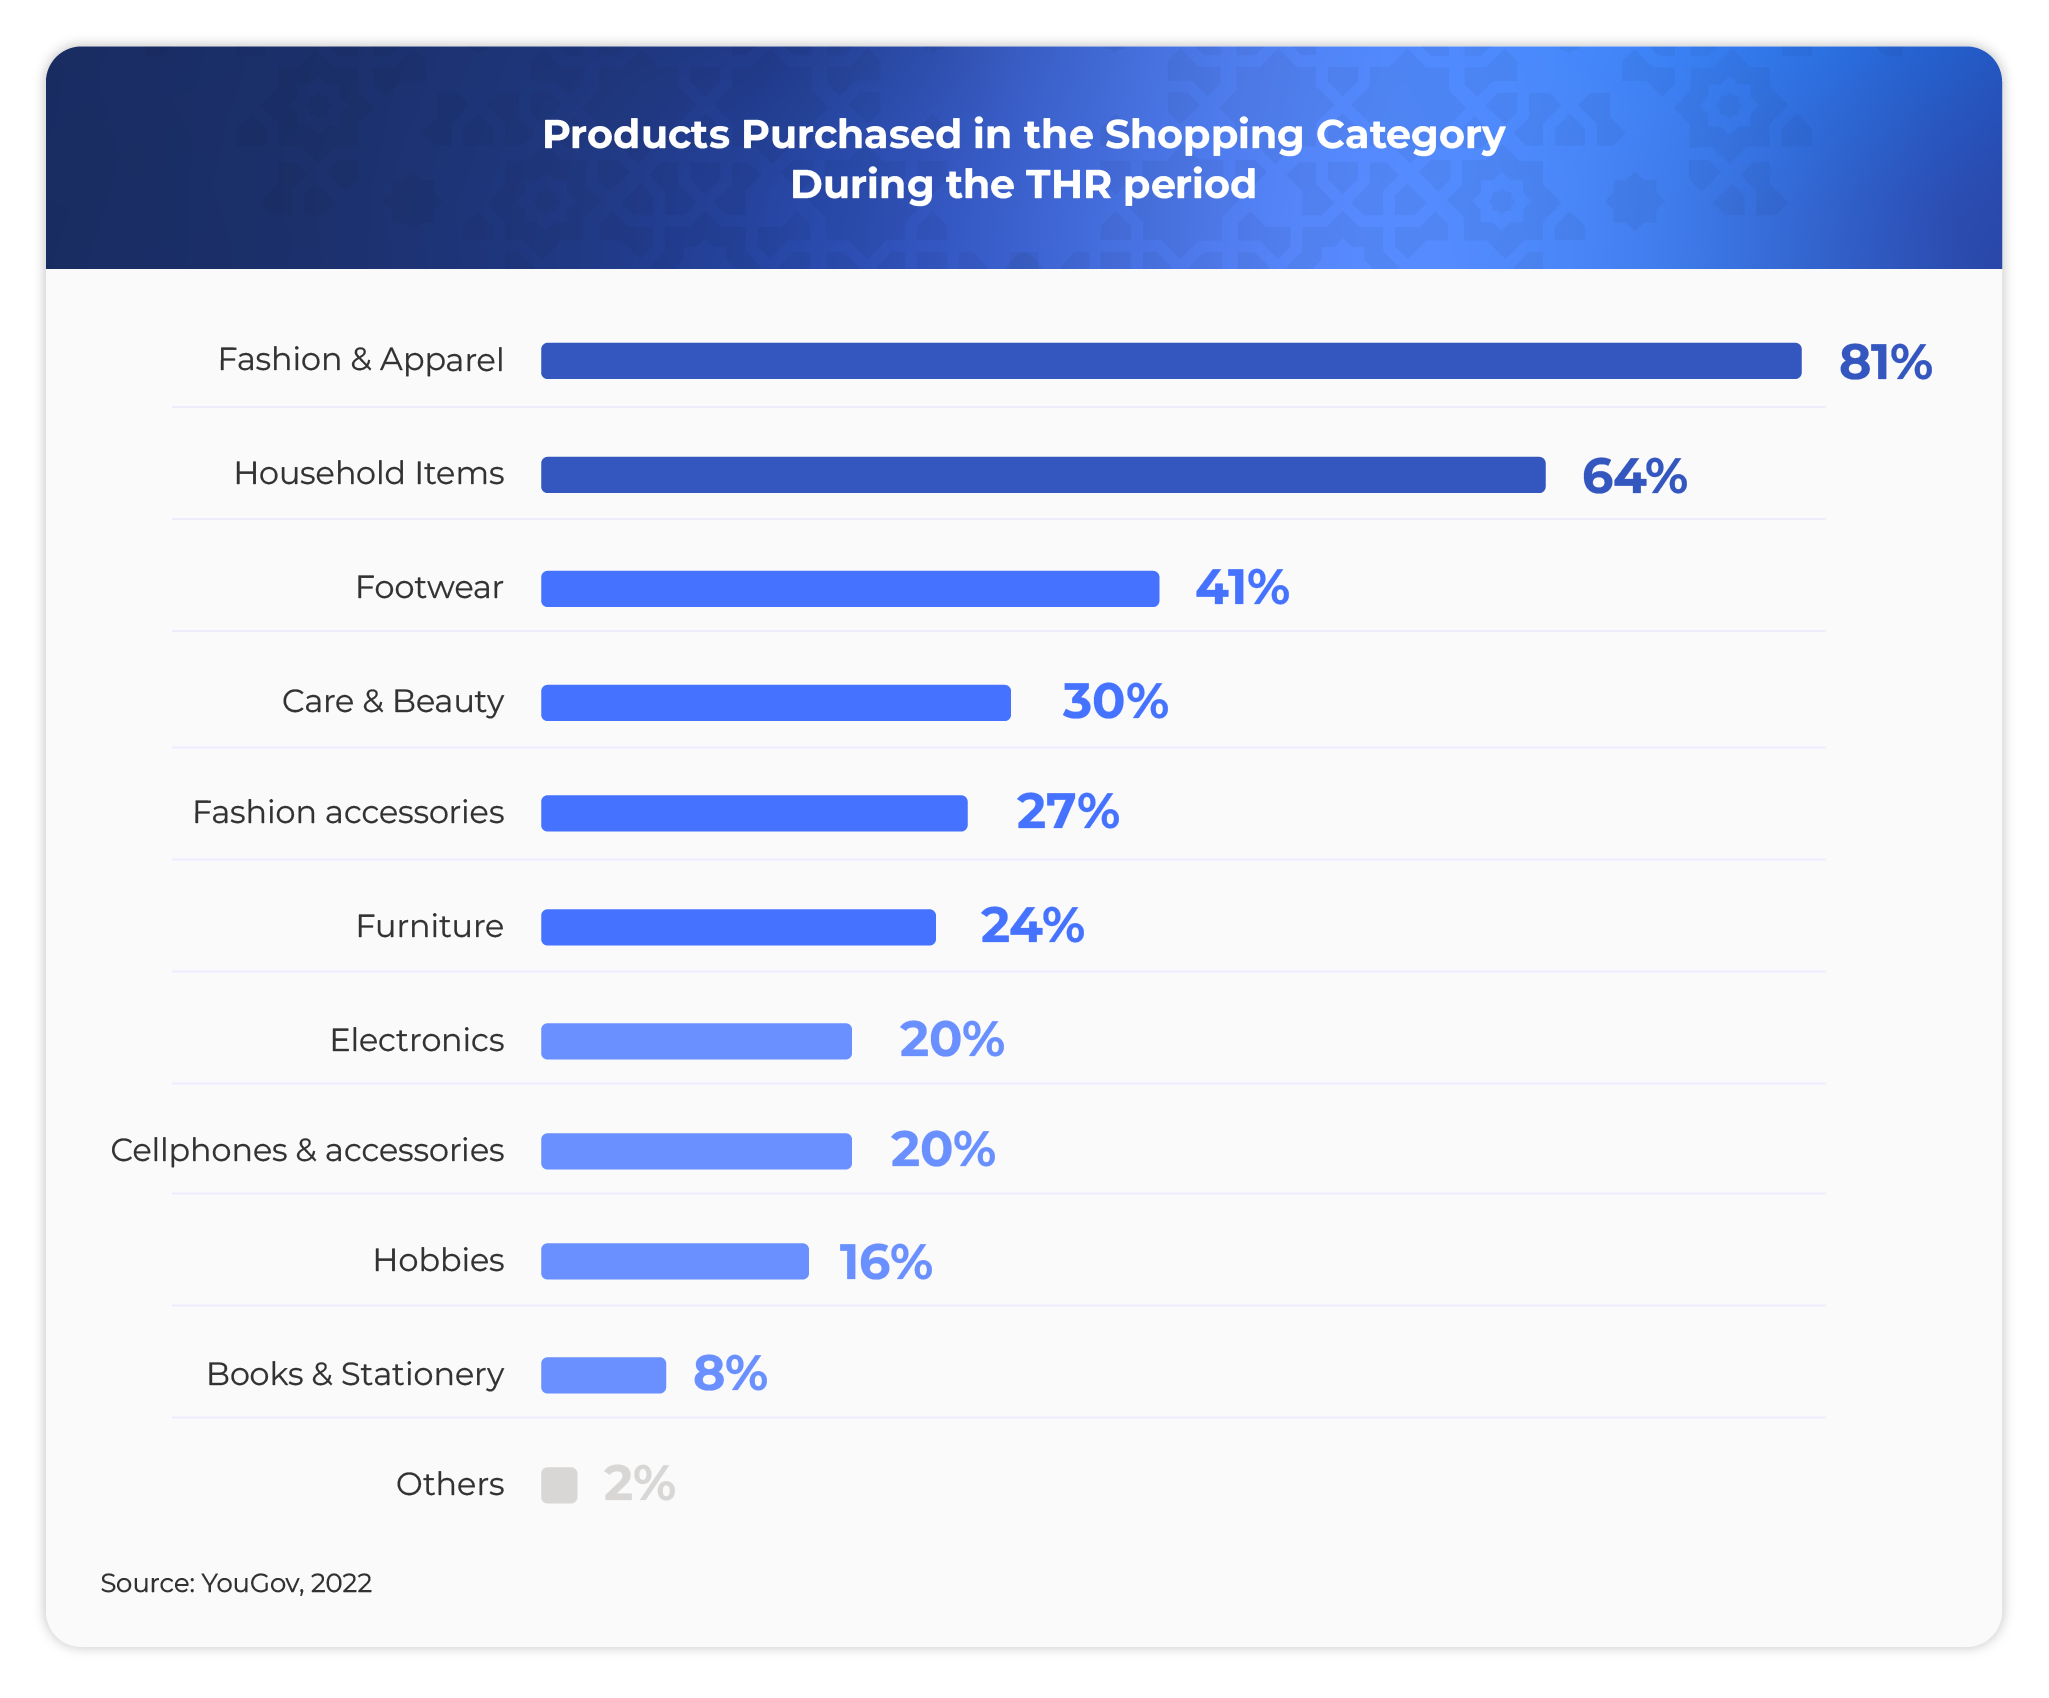 Products Purchased in the Shopping Category During the THR period